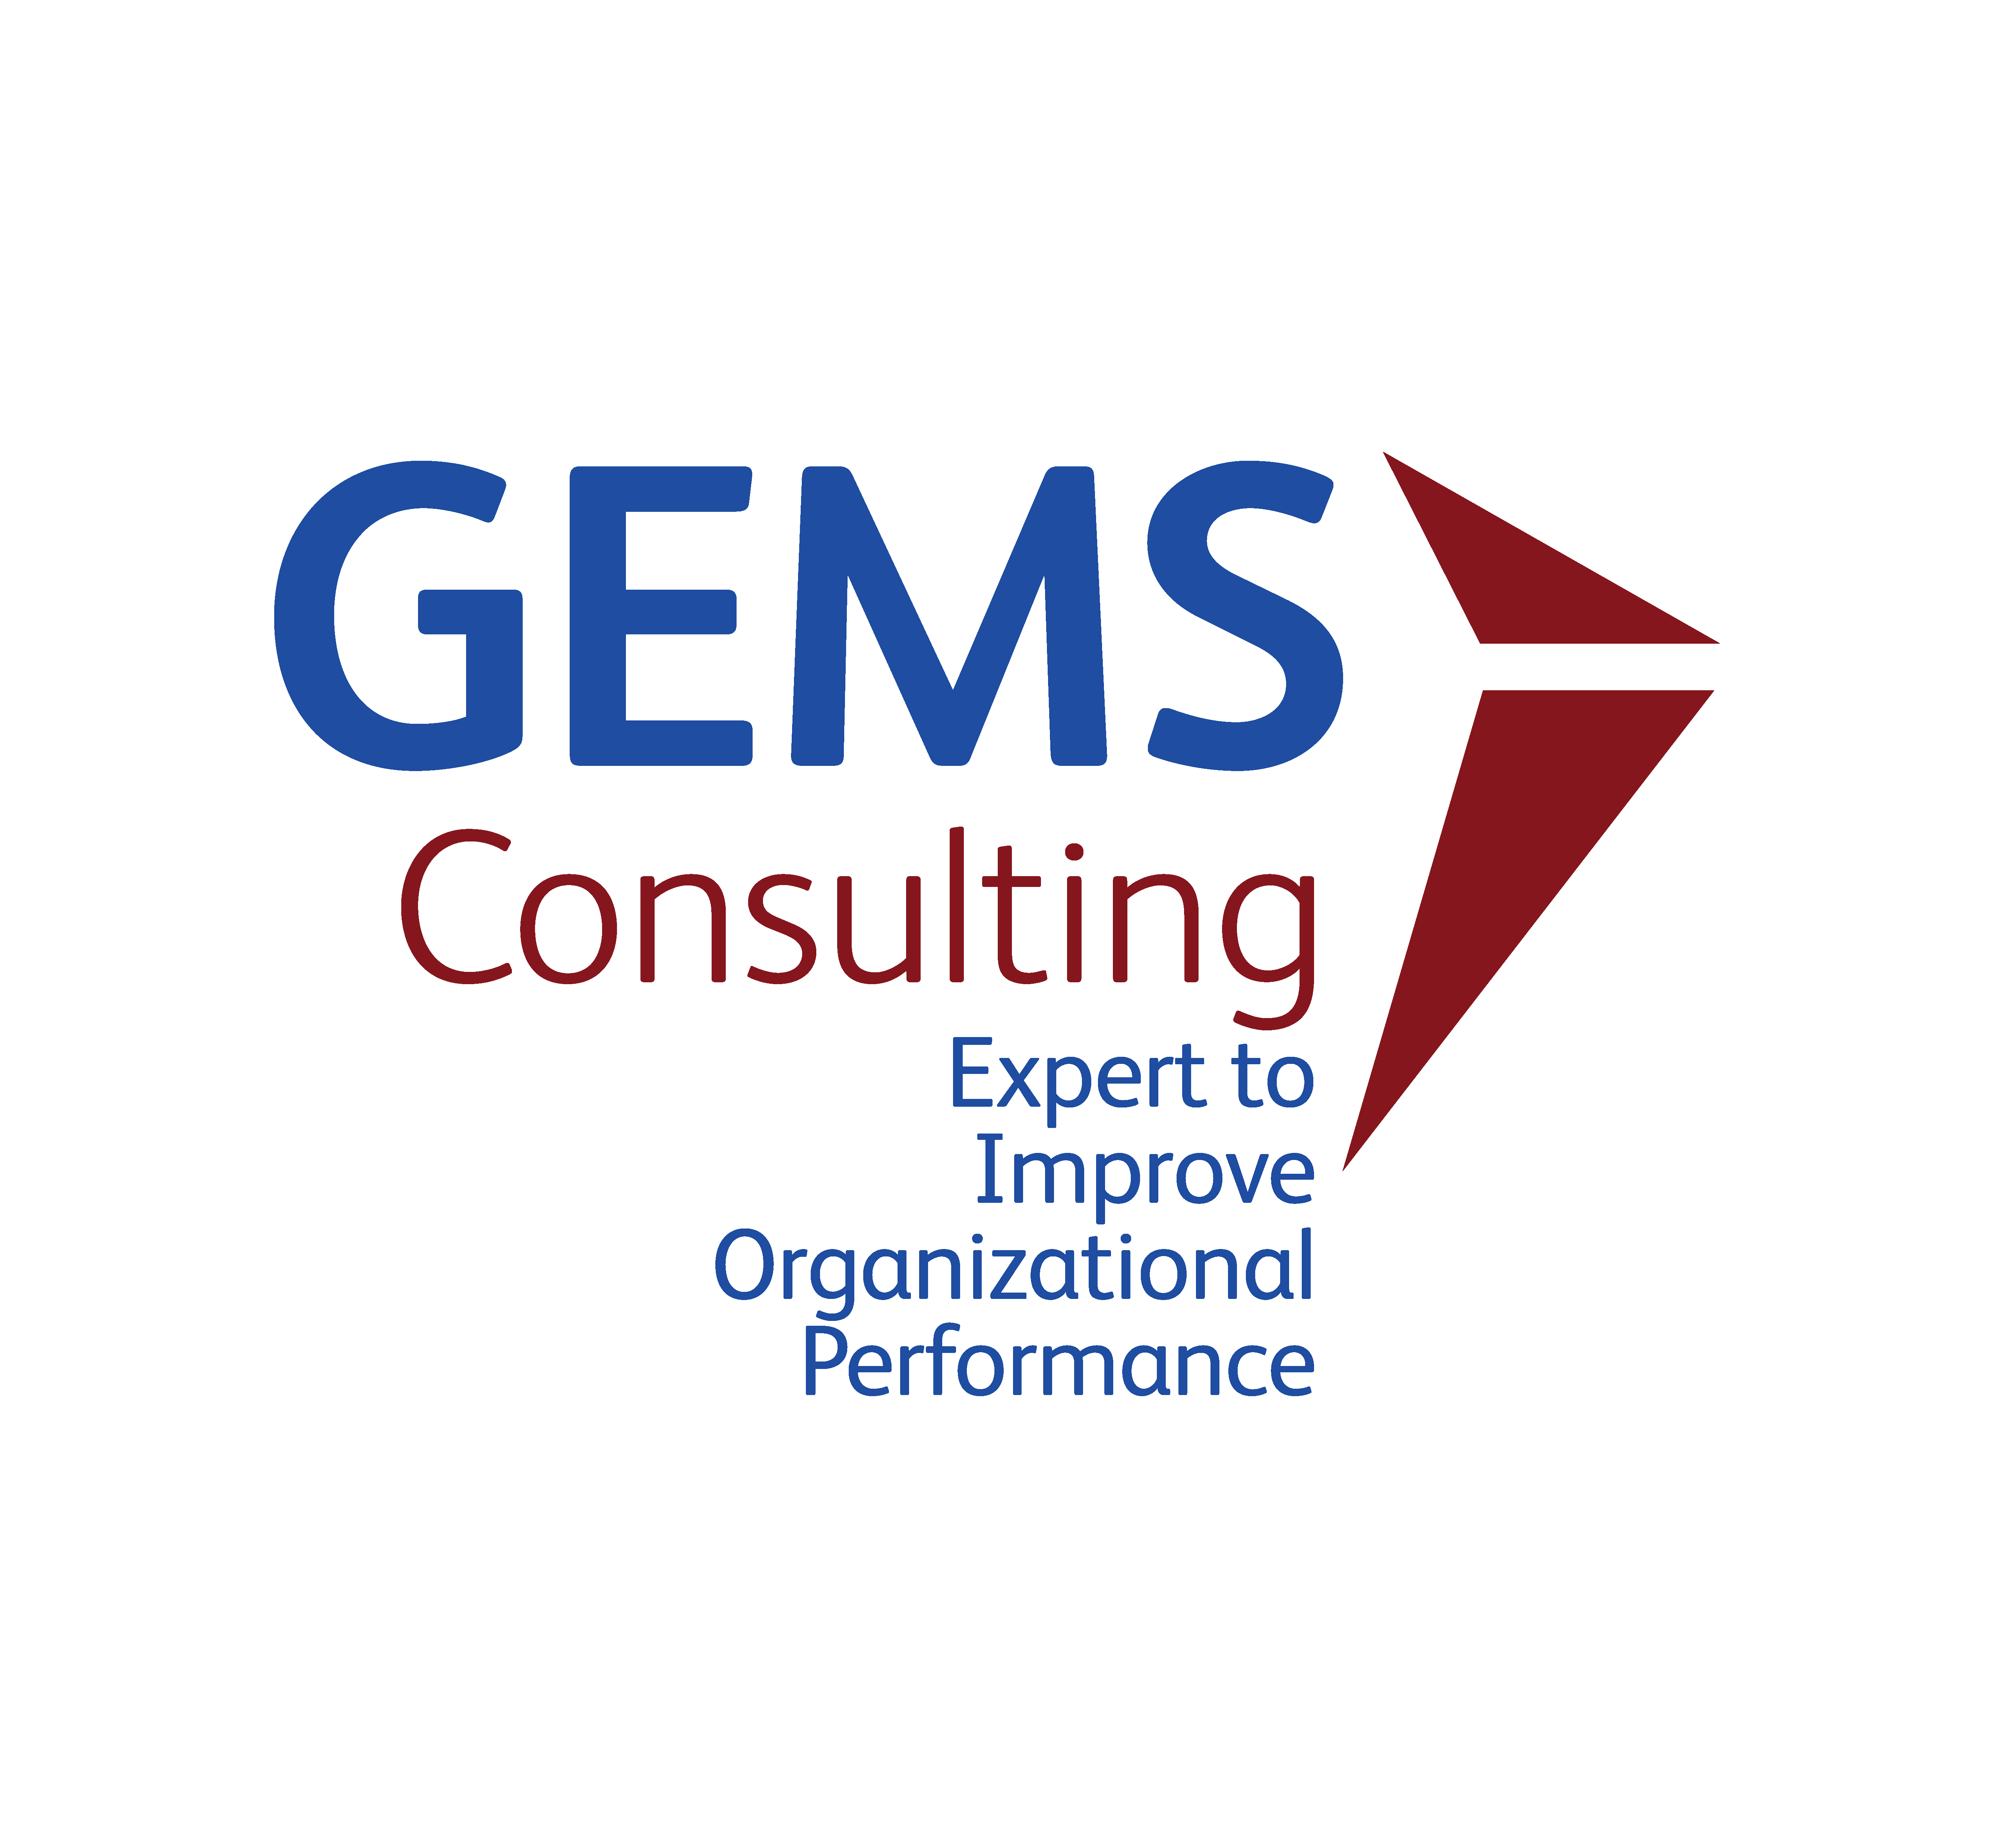 GEMS Consulting